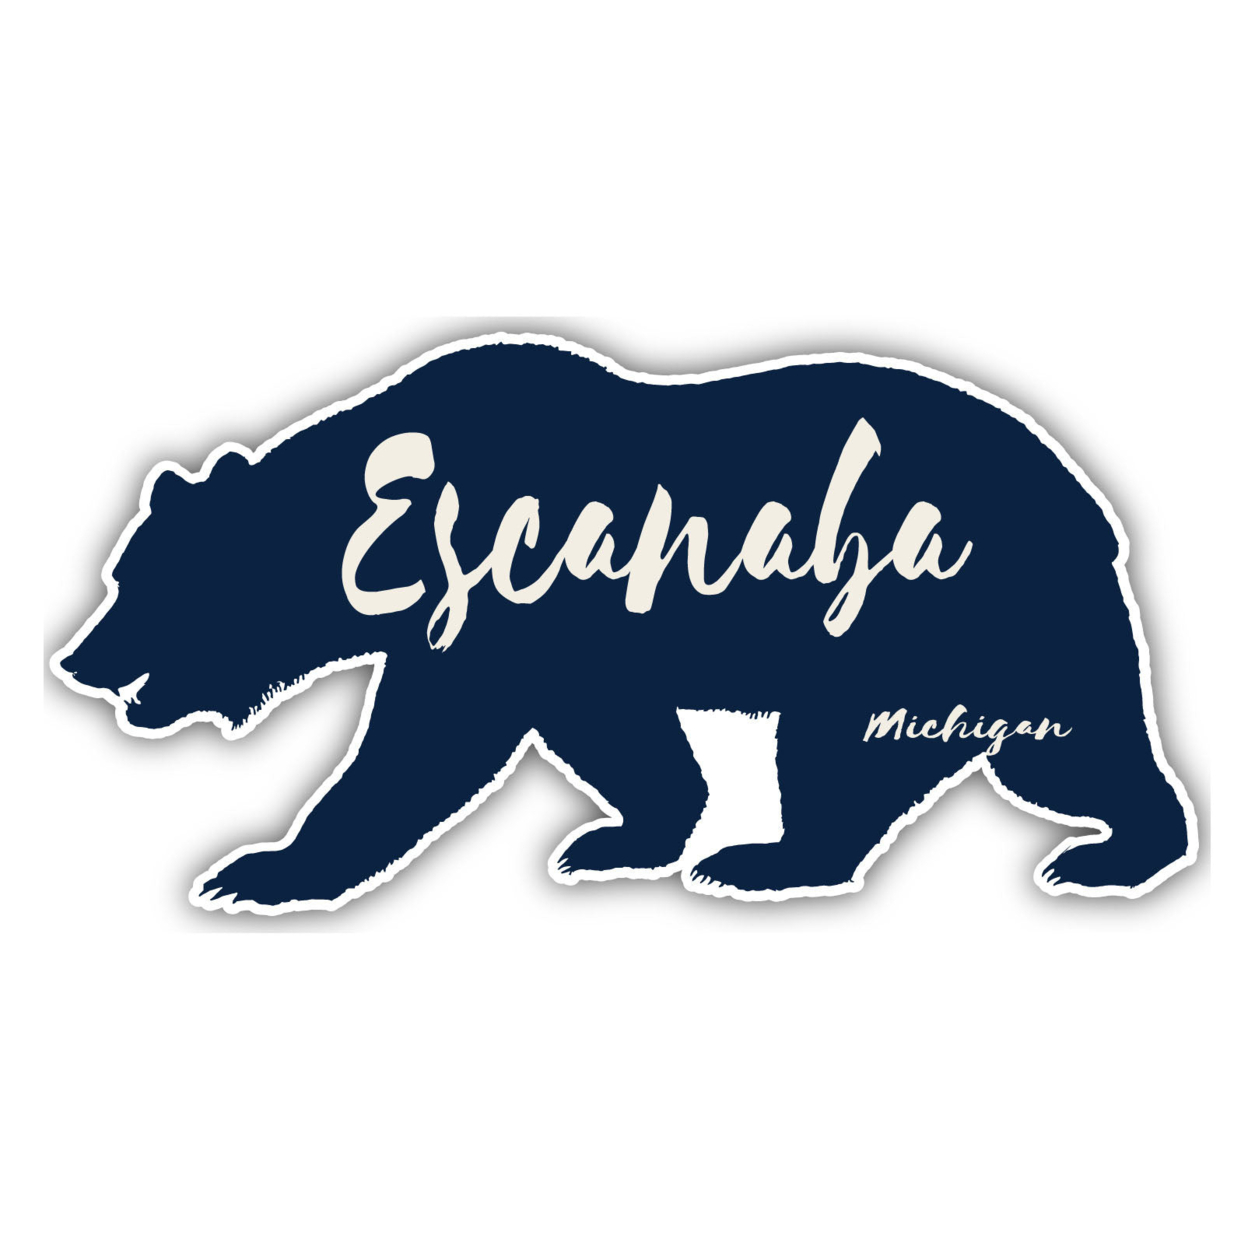 Escanaba Michigan Souvenir Decorative Stickers (Choose Theme And Size) - 4-Pack, 10-Inch, Bear